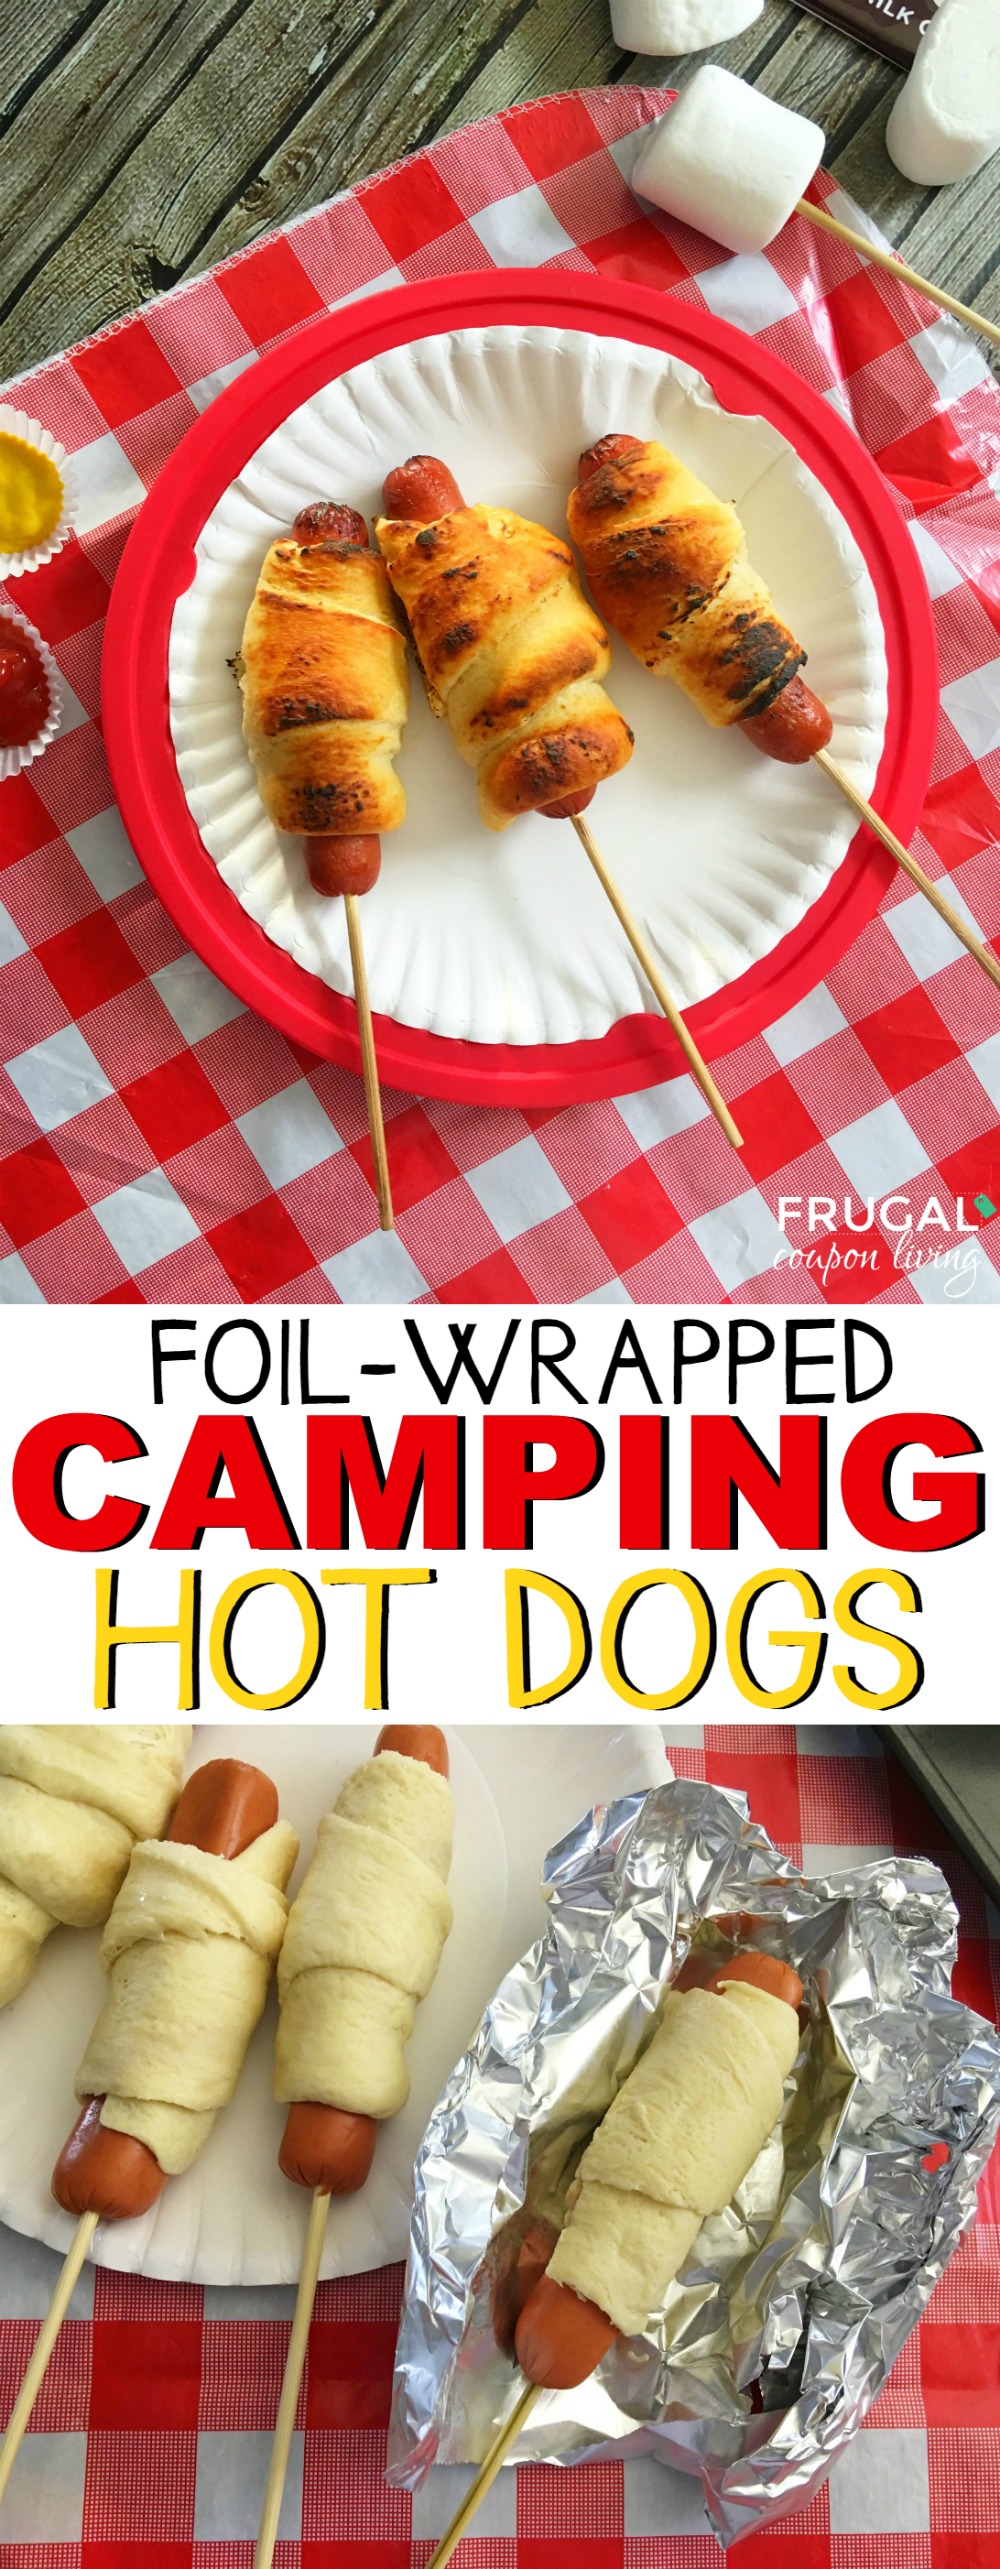 camping-hot-dogs-recipe-frugal-coupon-living